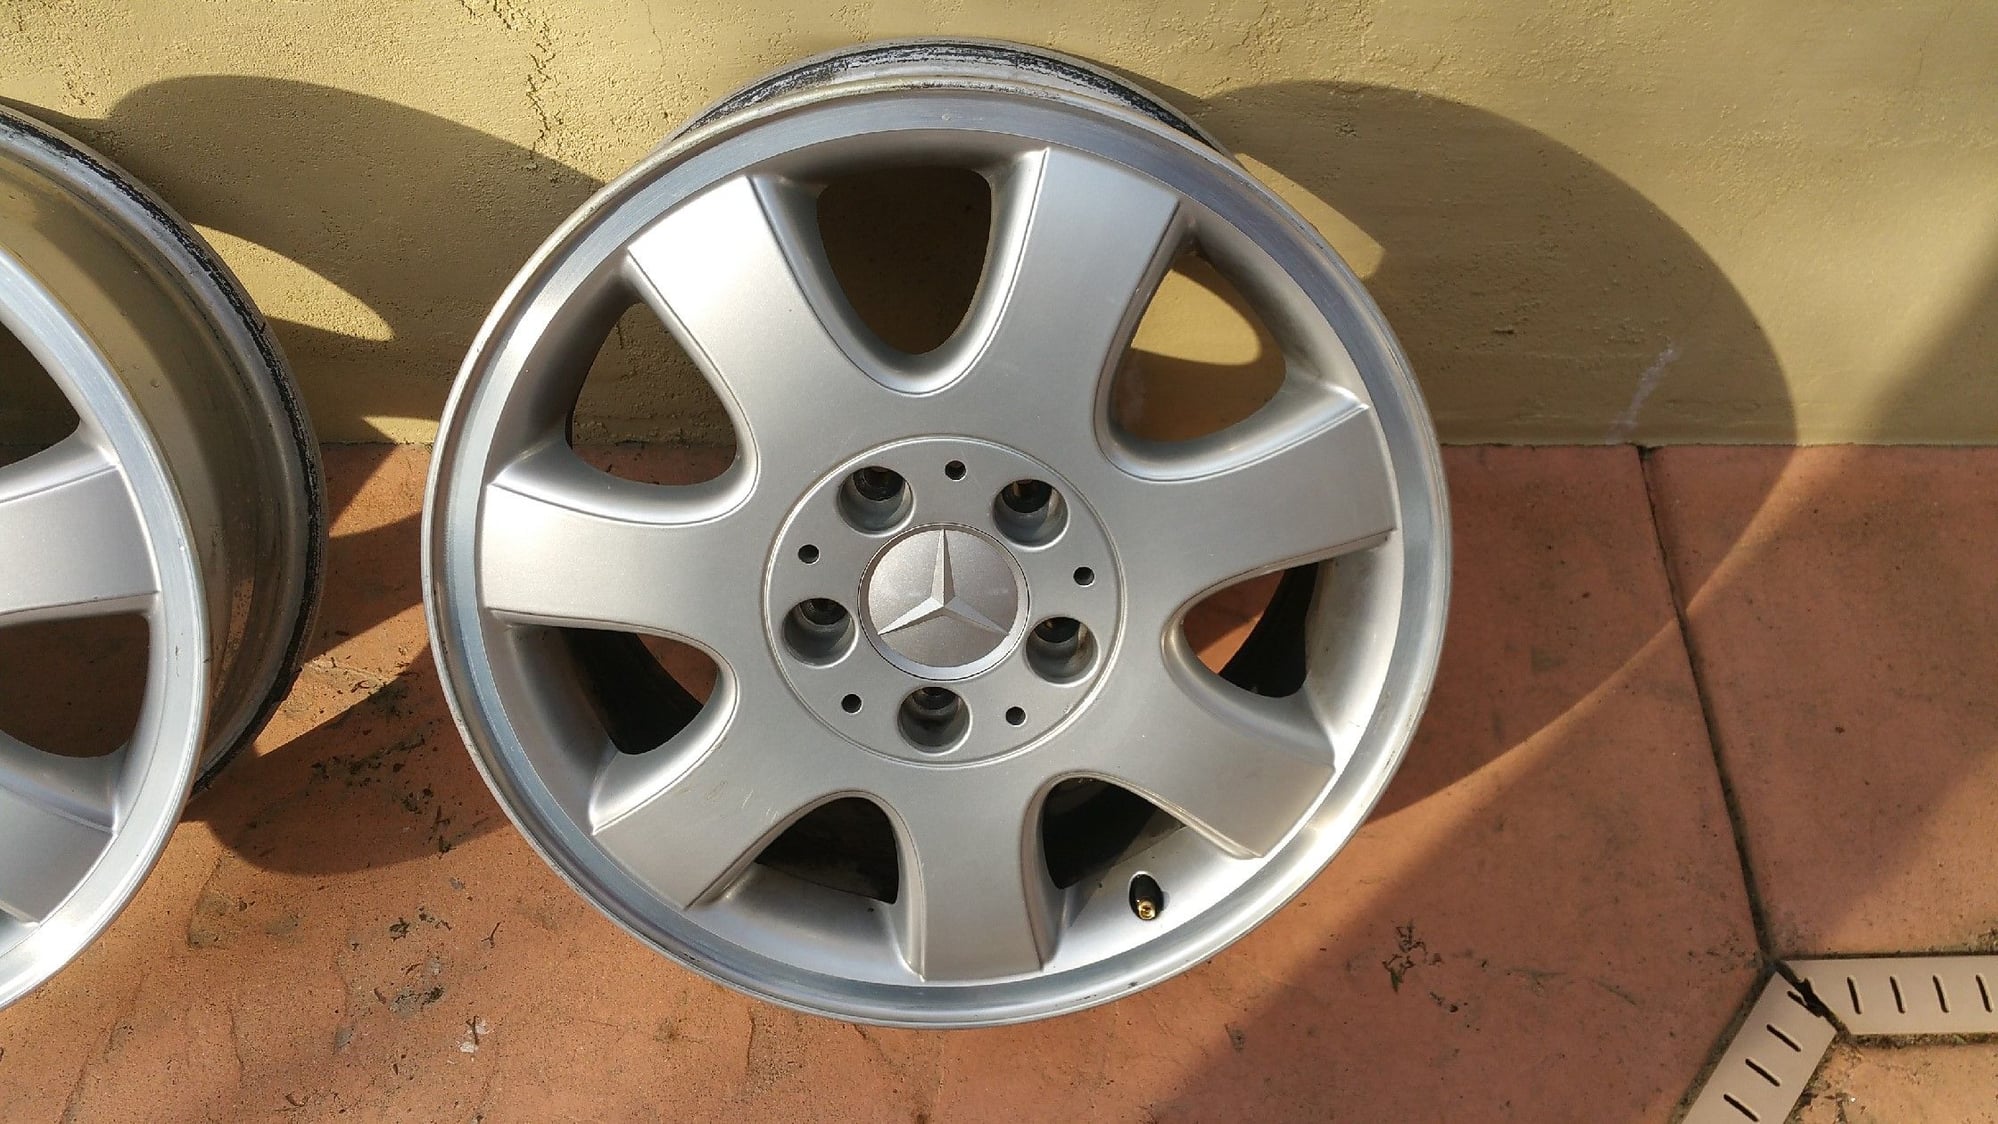 Wheels and Tires/Axles - Set of 16x7 2001 CLK wheels. - Used - 1998 to 2019 Any Make All Models - Sacramento, CA 95819, United States